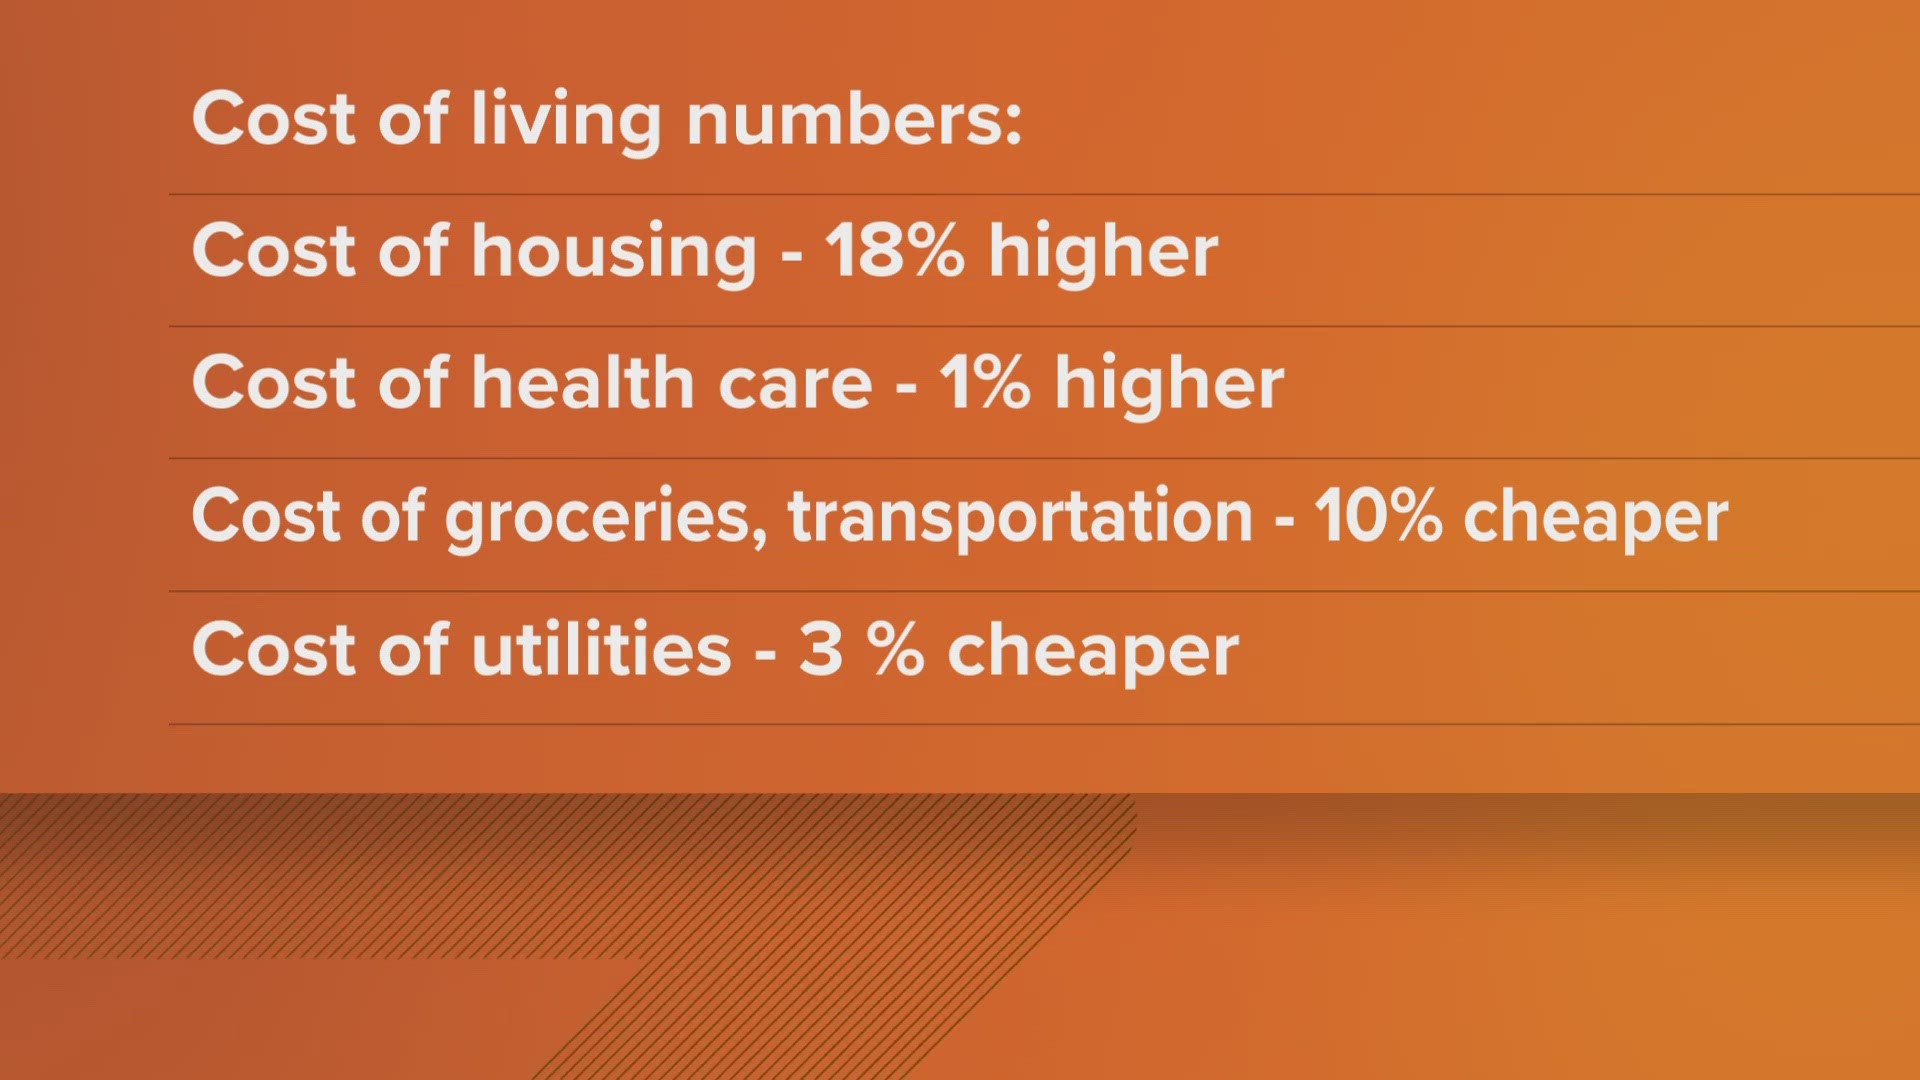 The overall cost of living in Austin is above the national average.